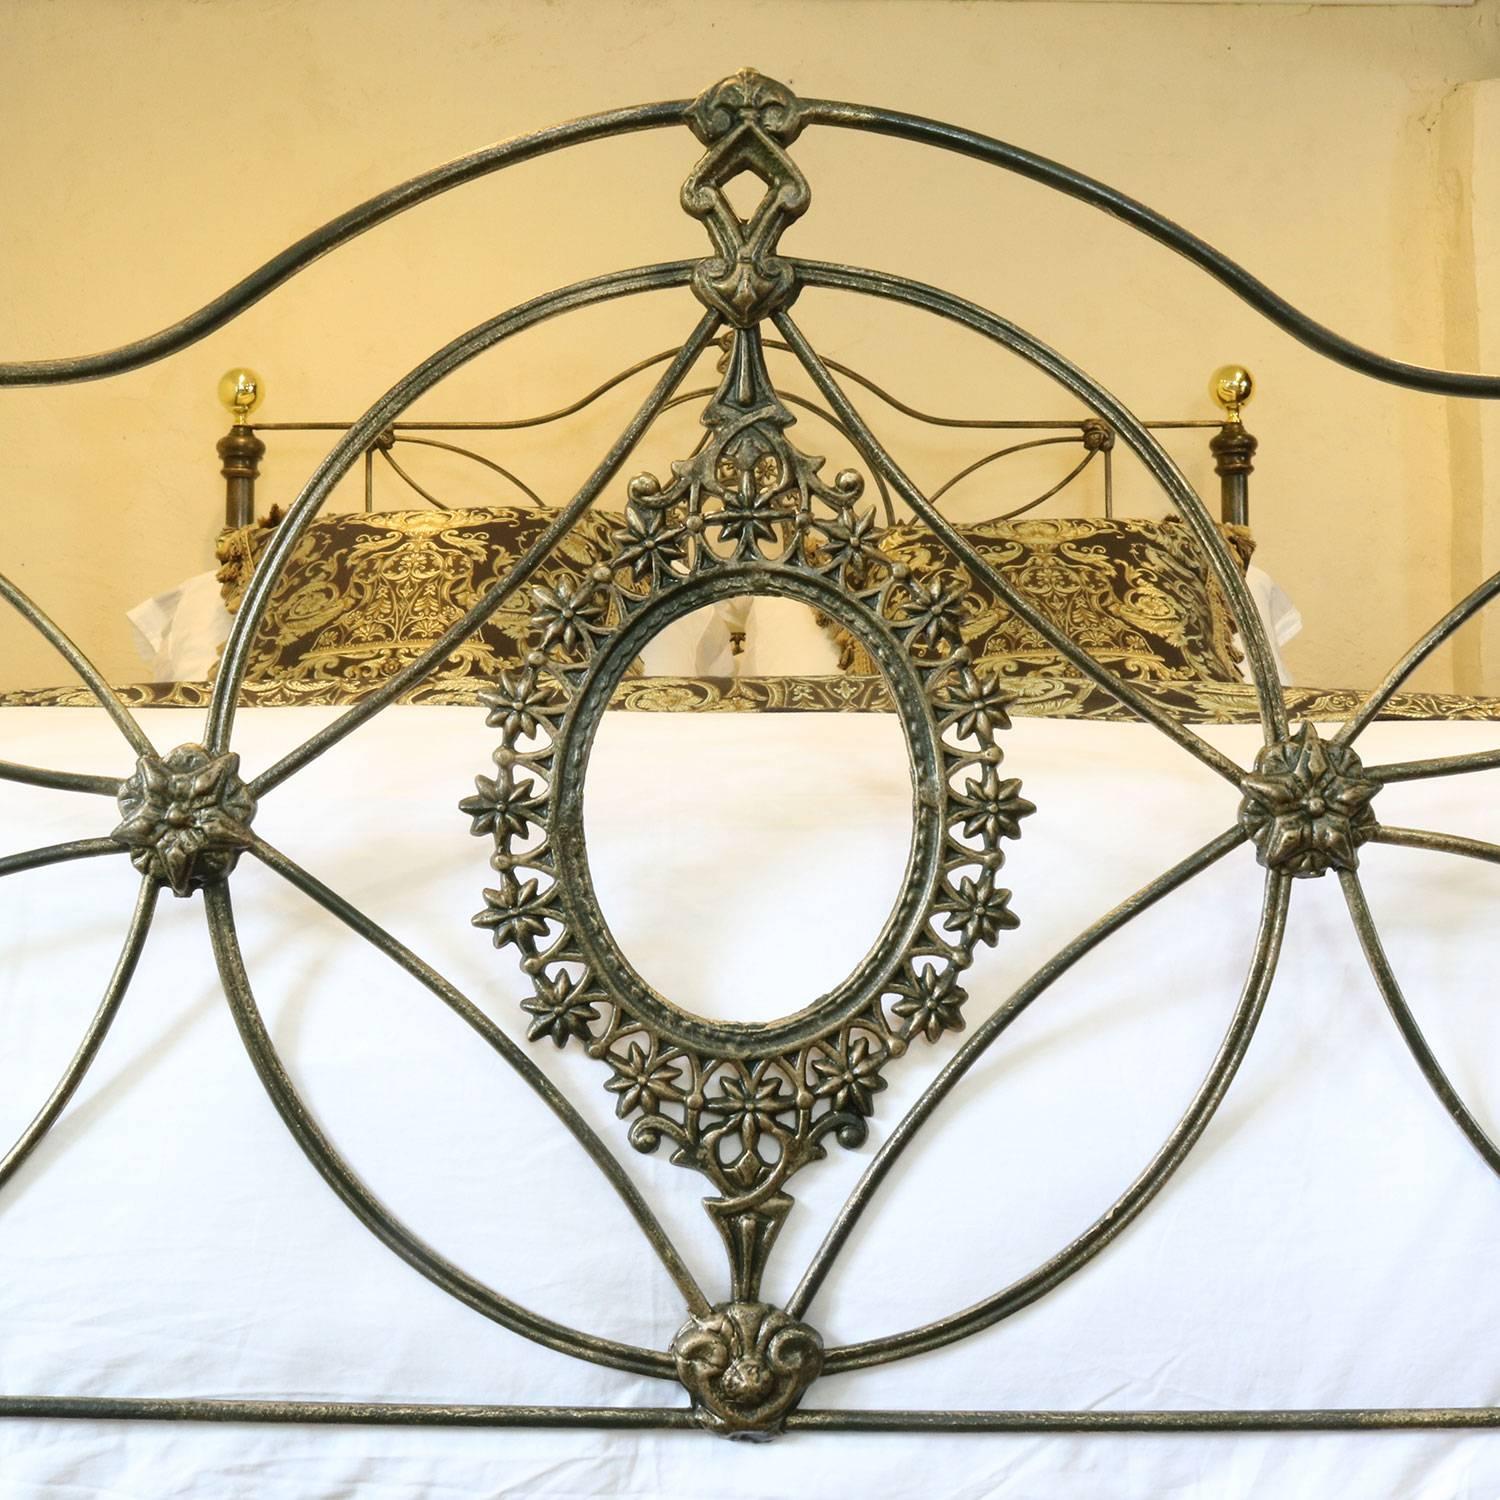 A superb cast iron bedstead finished in juniper green, with gold highlighting.

This bed accepts a British king-size or American queen-size (60 inches, 5ft or 150cm wide) base and mattress.

The price is for the bed frame alone. The base,